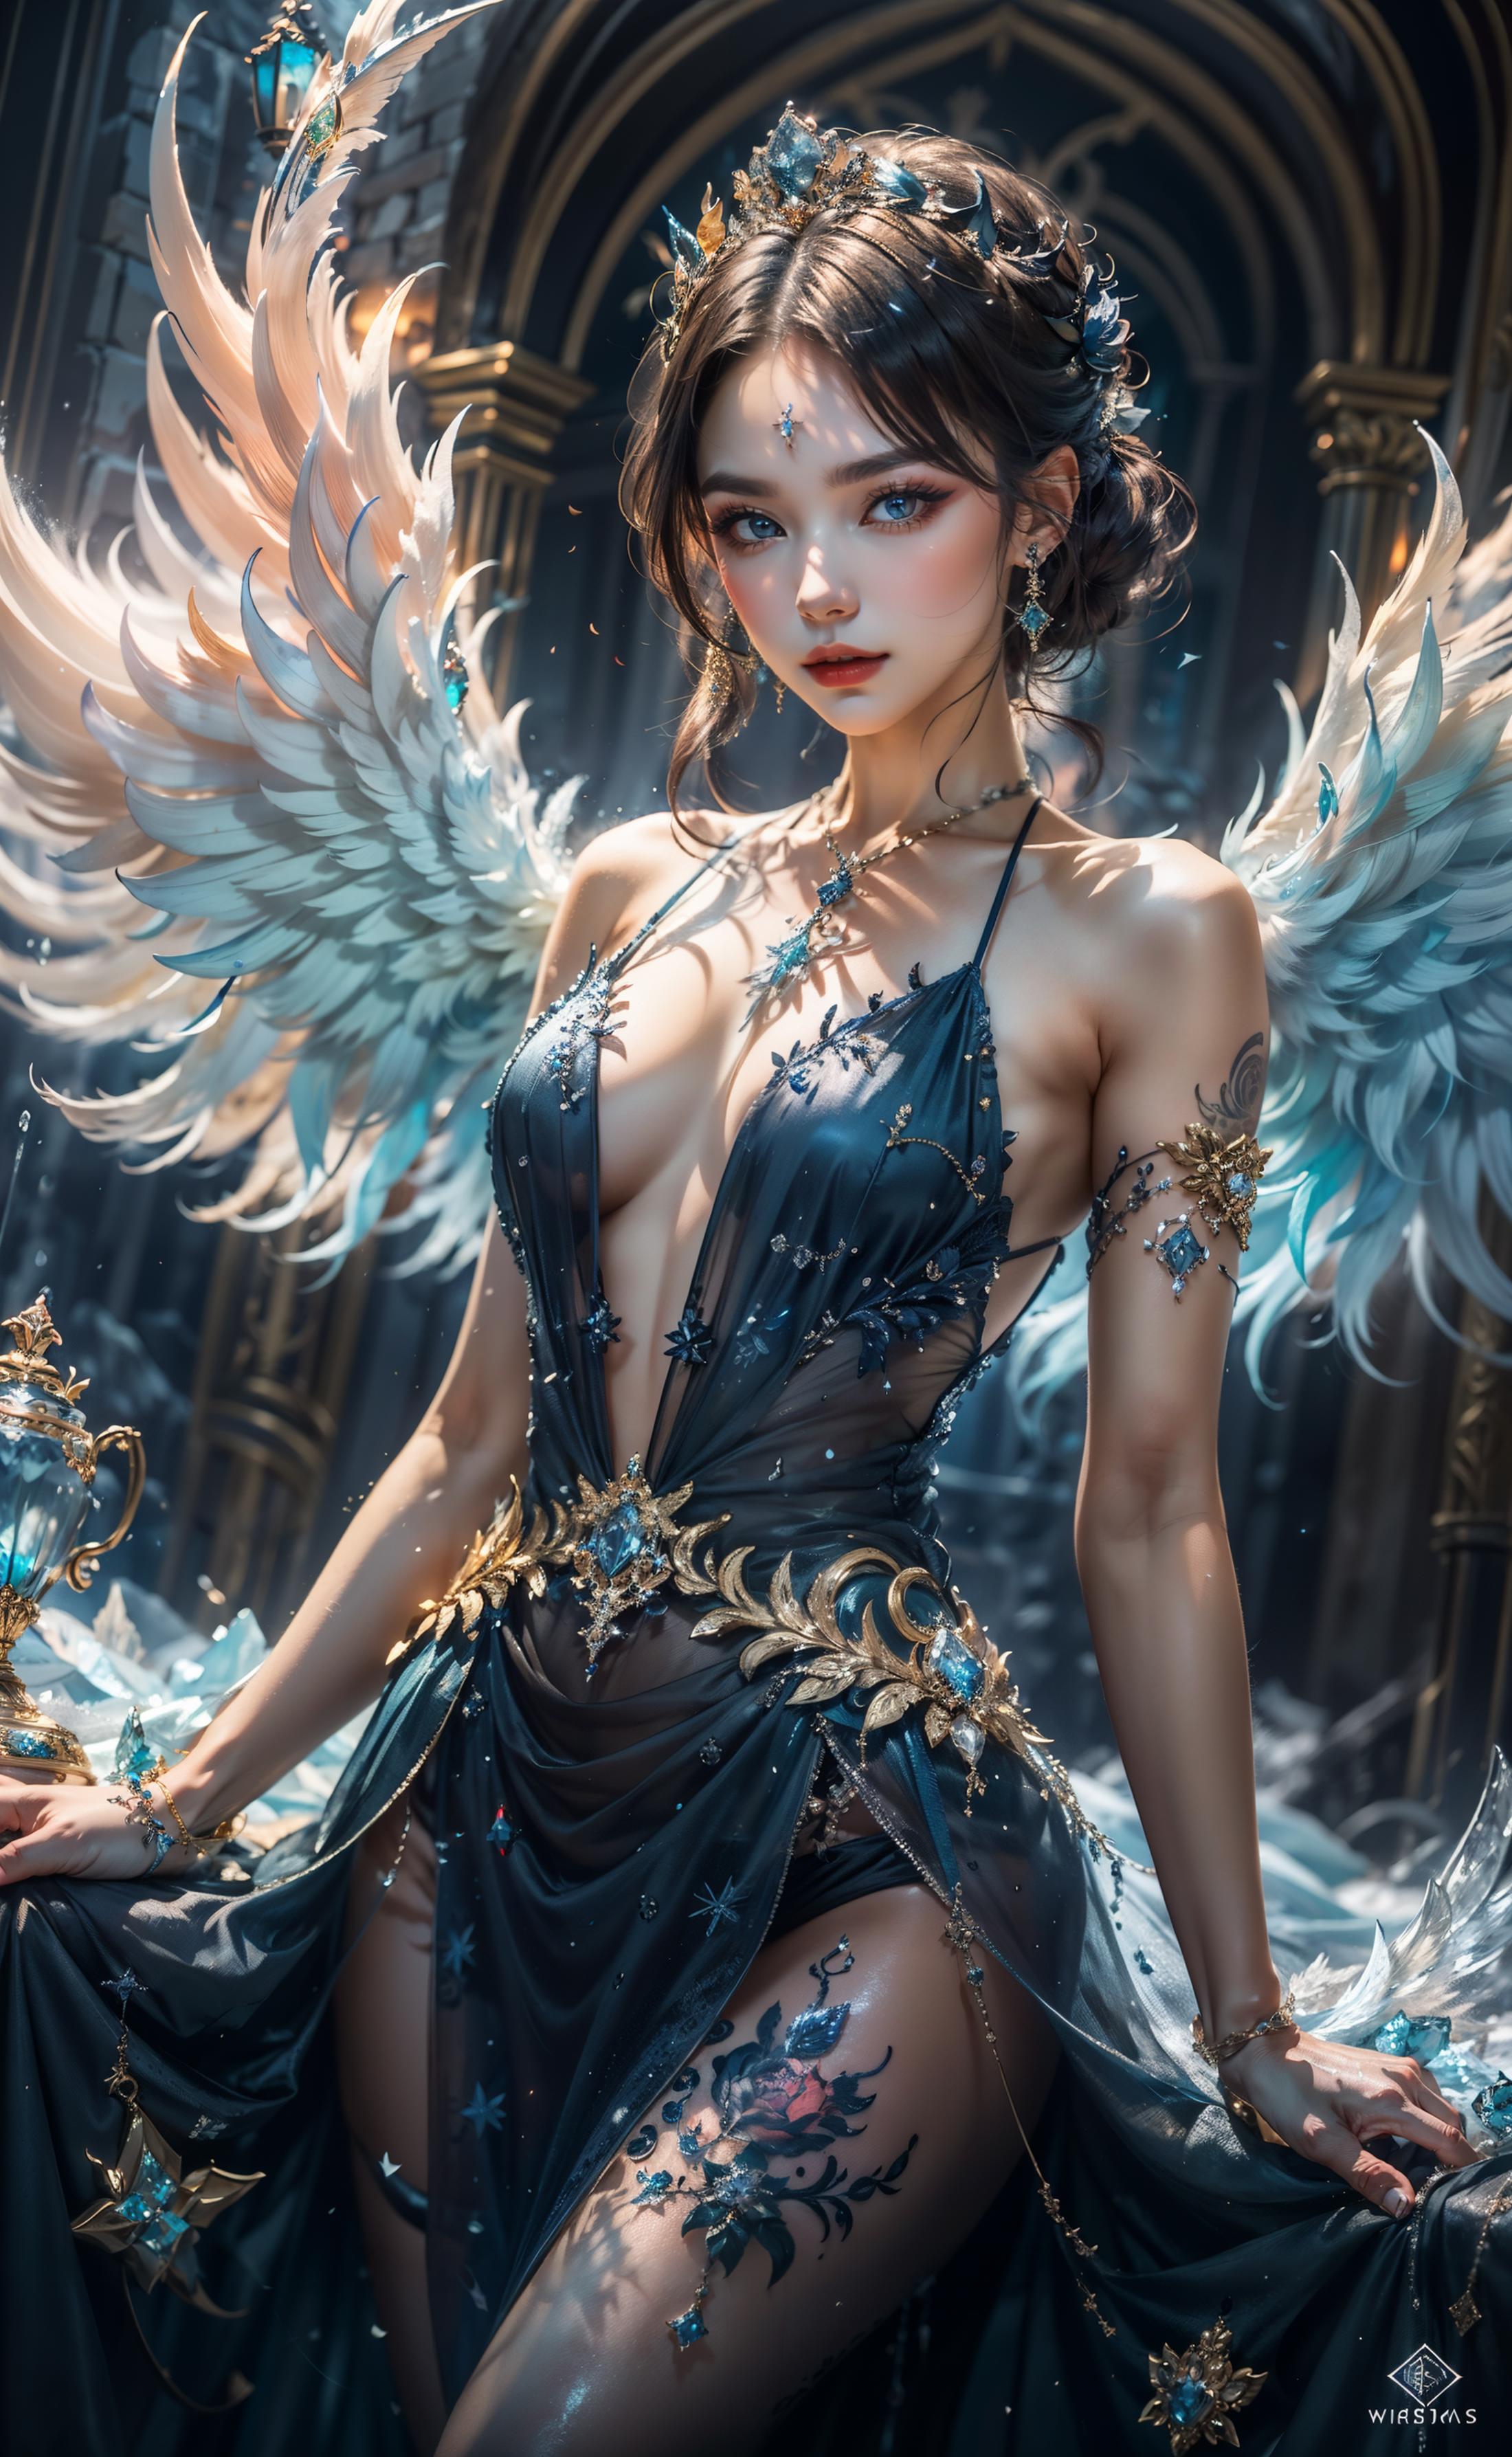 Anime-style digital art of a woman wearing a blue dress with wings and a necklace.